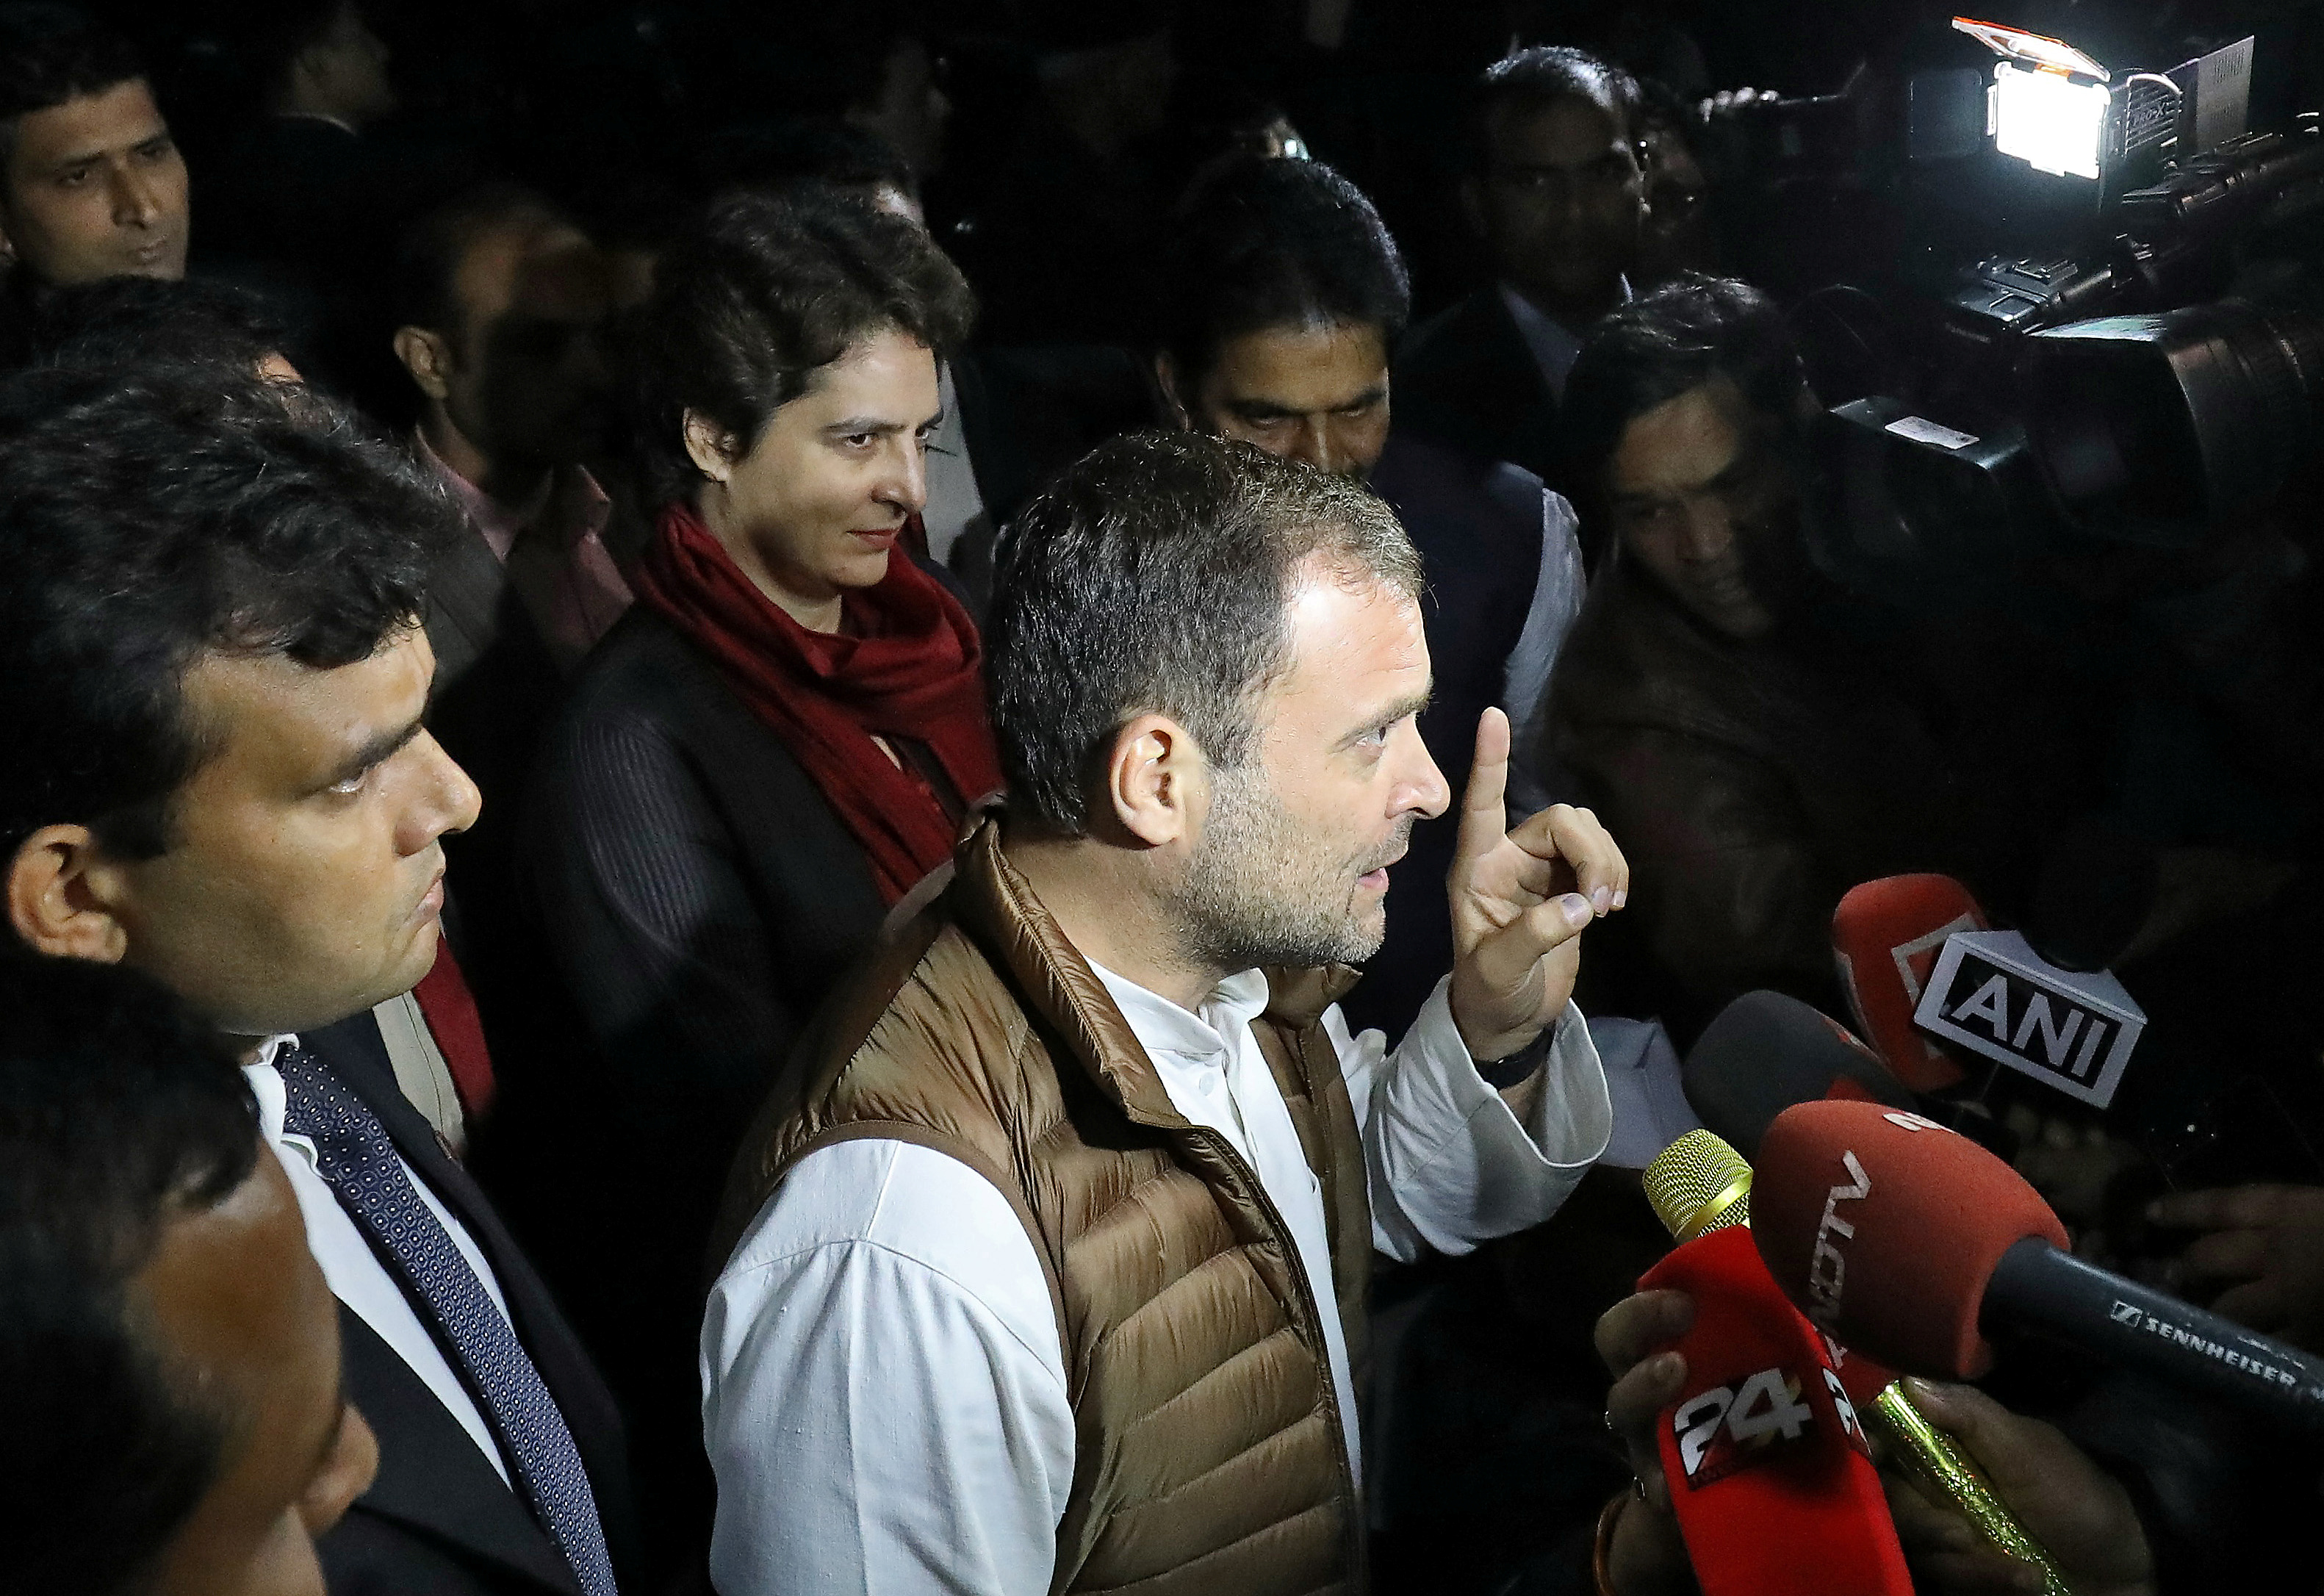 Rahul Gandhi, President of India's main opposition Congress party